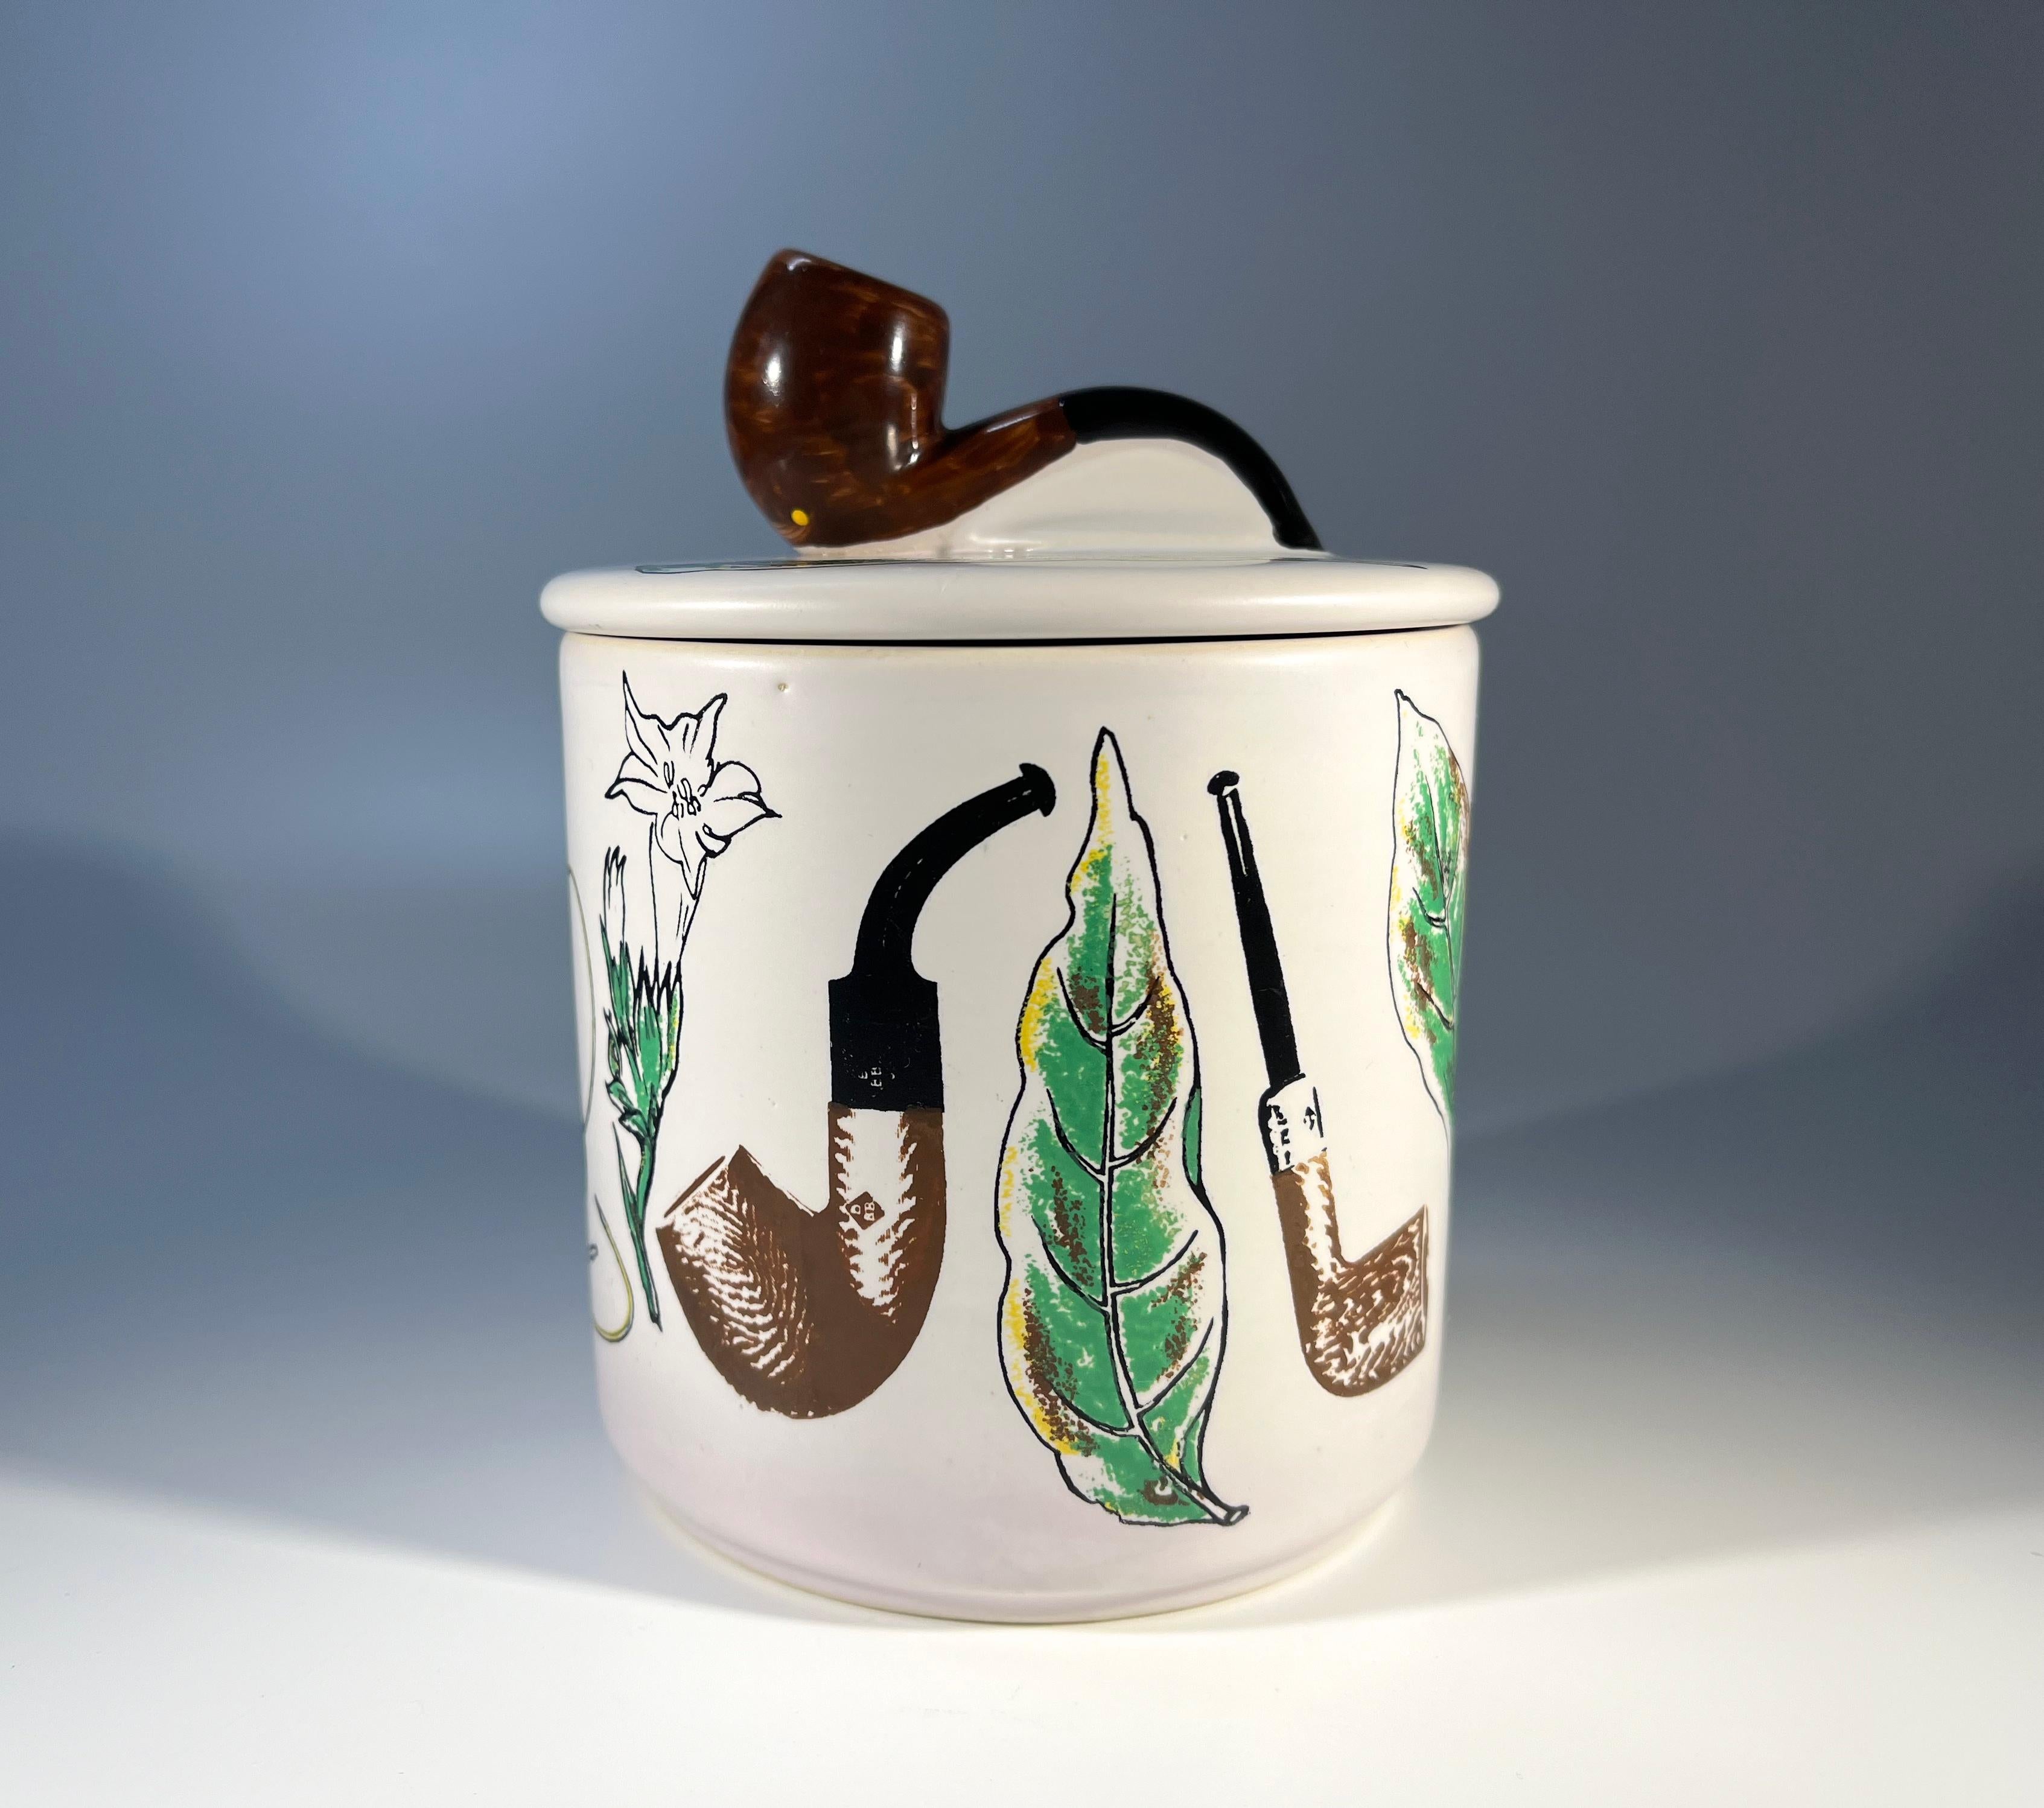 Marvellous mid-century modern, pipe themed ceramic hand-painted humidor tobacco jar by BBB
Made by BBB in Denmark for Britain's Best Briars company
Stamped BBB, Made In Denmark on base
The lid has a rubber band
Circa Mid-20th Century
Height 5.5